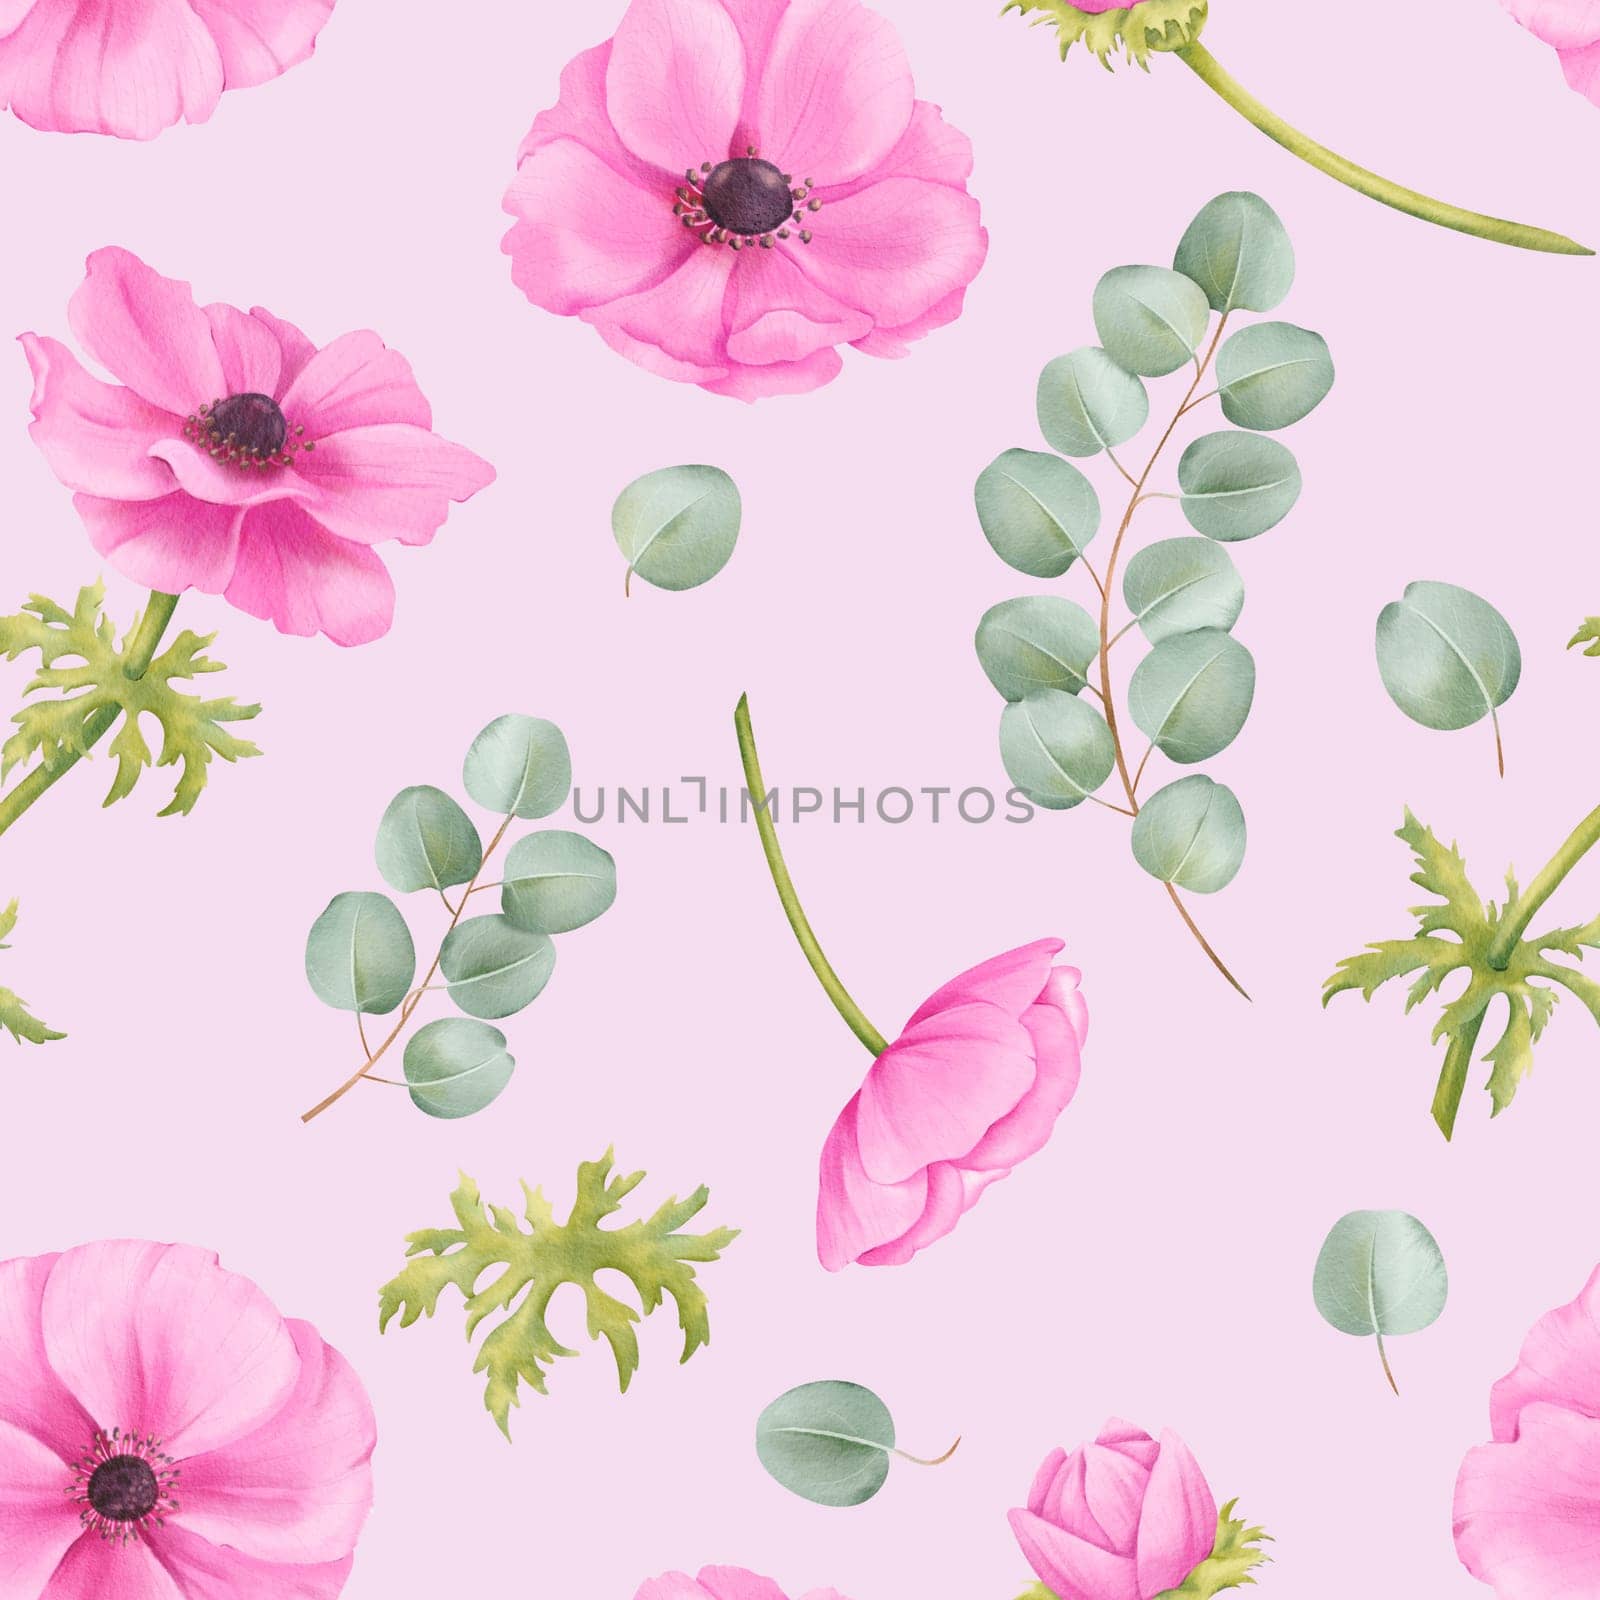 Seamless pattern on a pink background. Pink watercolor anemone flowers, greenery, eucalyptus leaves. Perfect for wallpapers, textiles, stationery, and packaging designs.